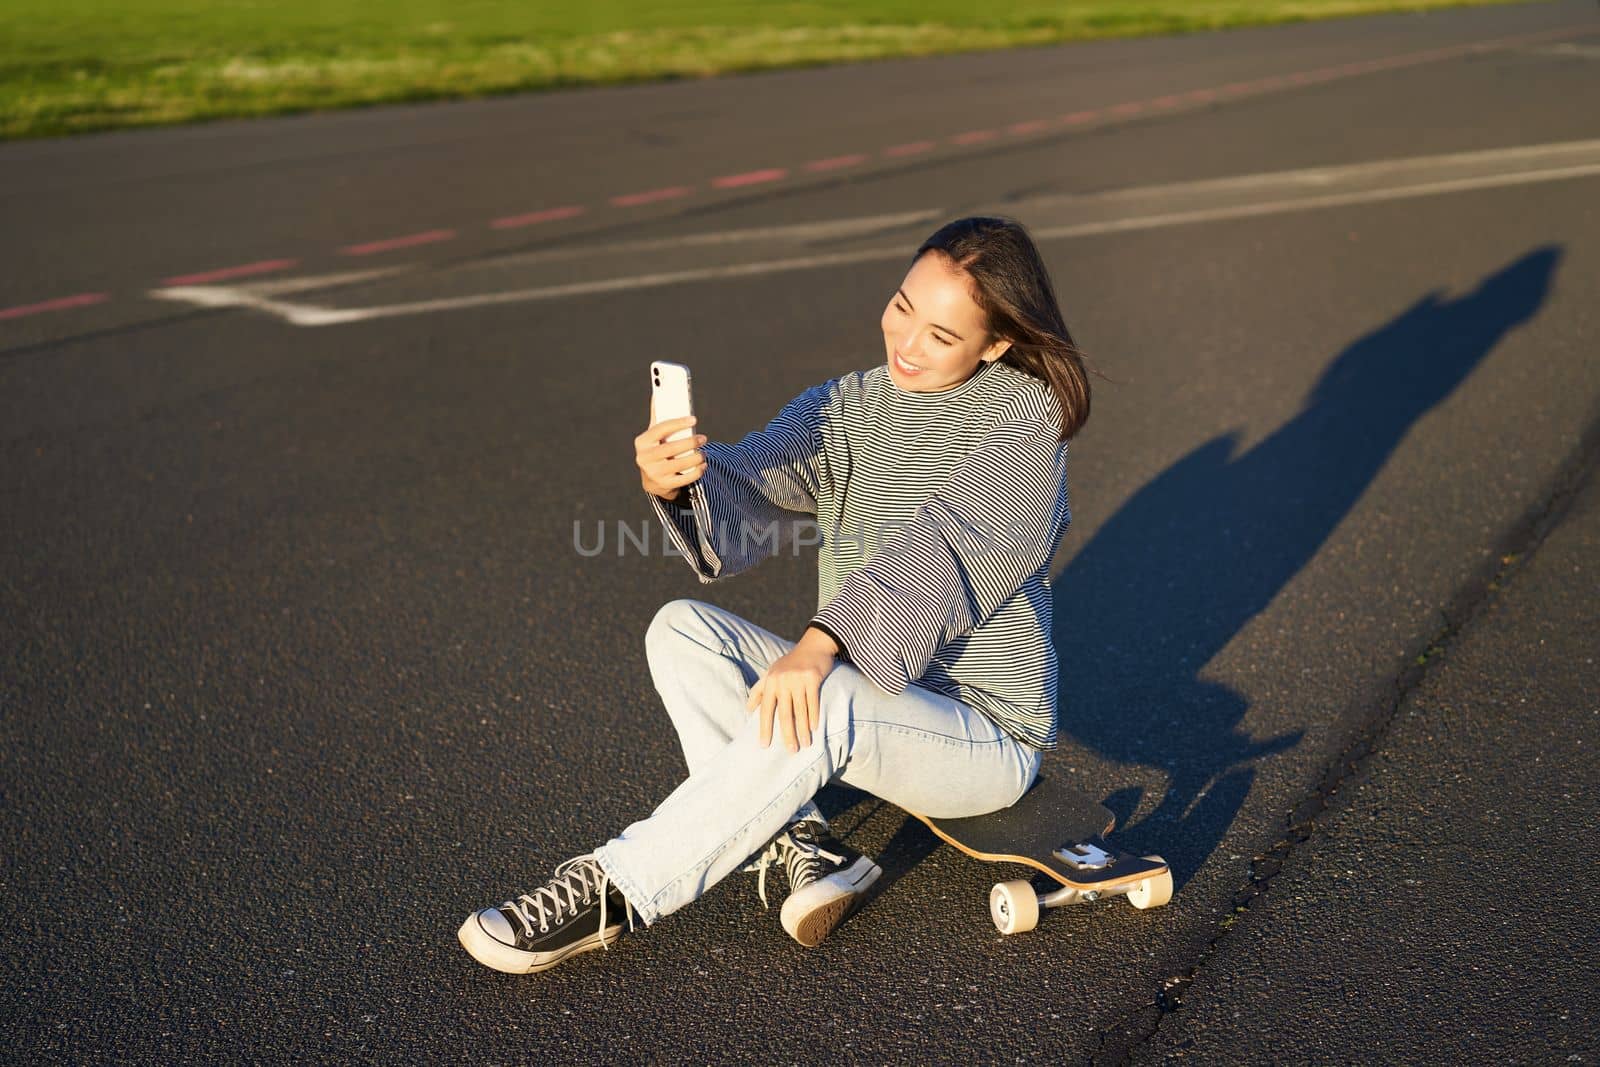 Beautiful korean girl takes selfie on smartphone, takes photo with her skateboard, enoys sunny day outdoors.